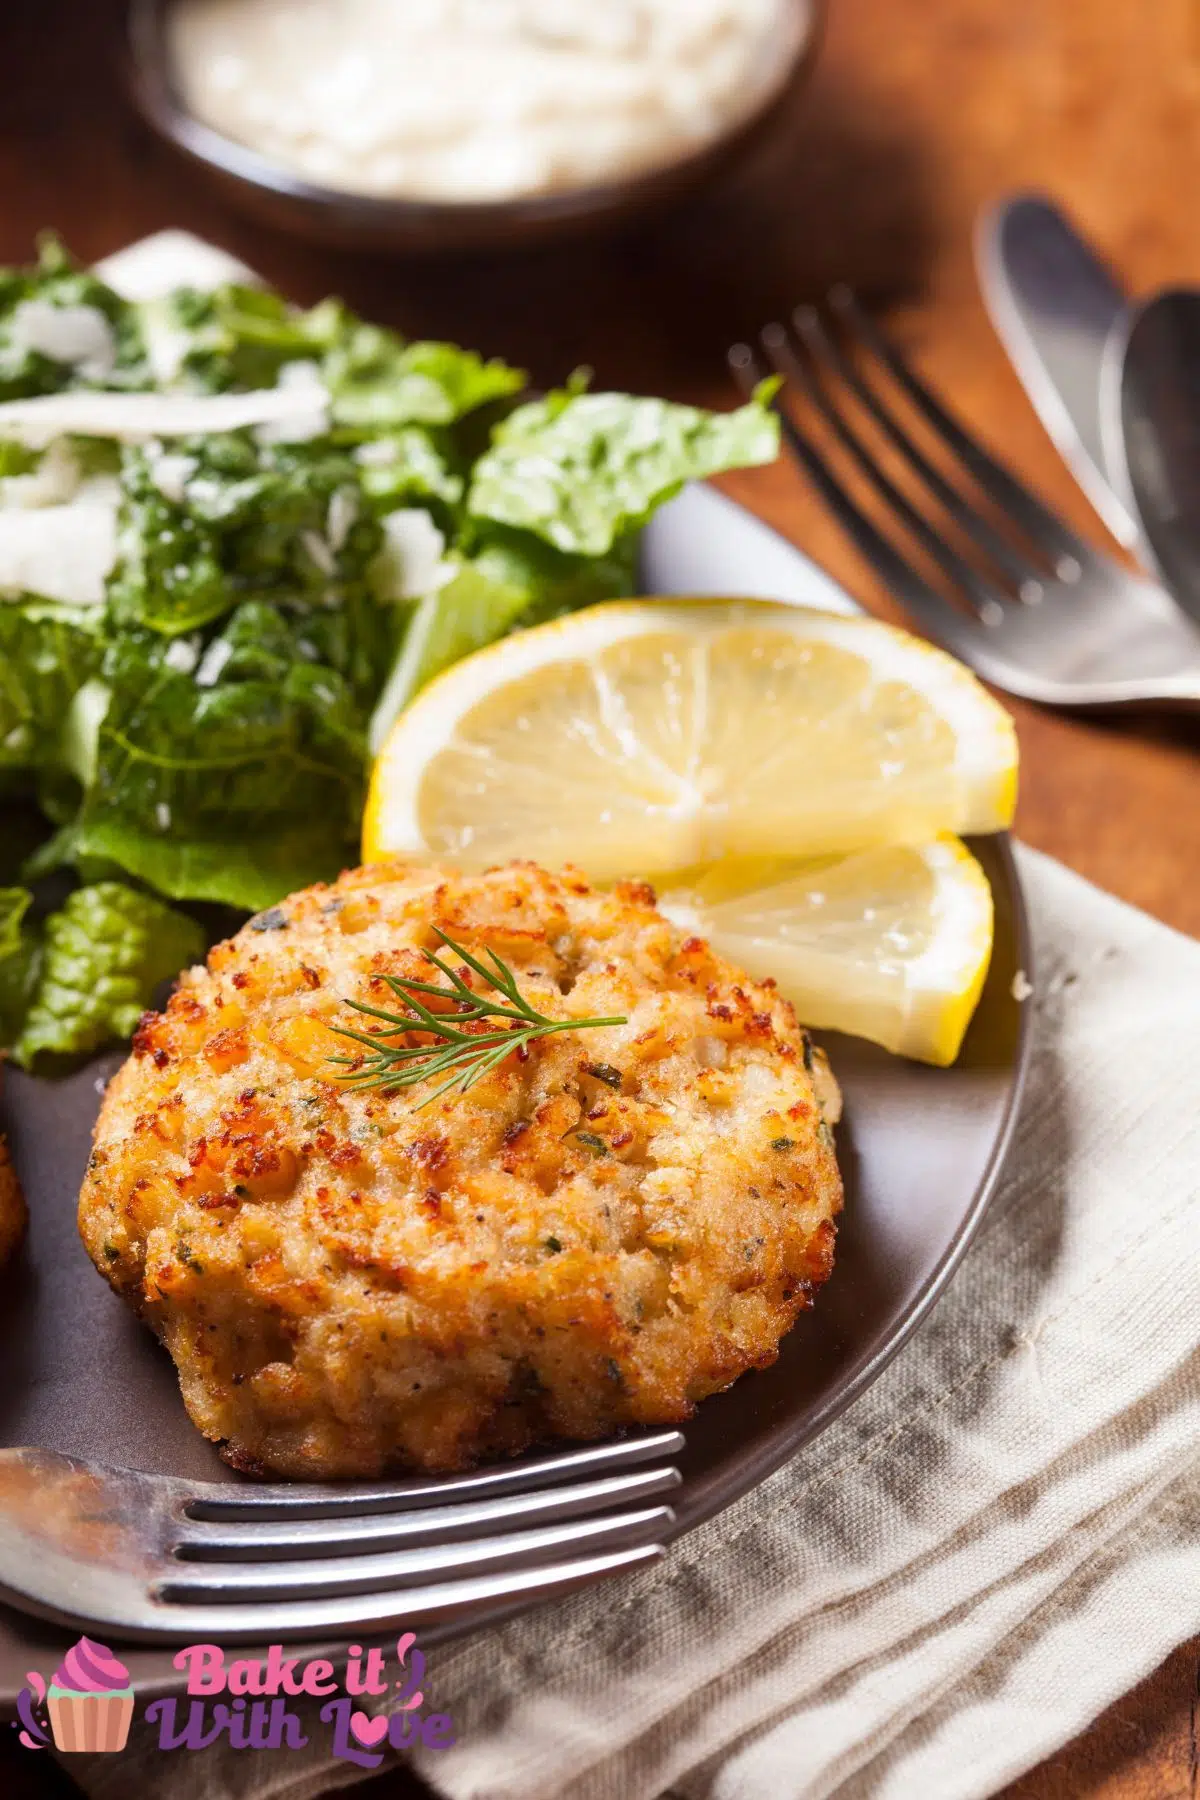 Tall image of a crab cake on a plate.